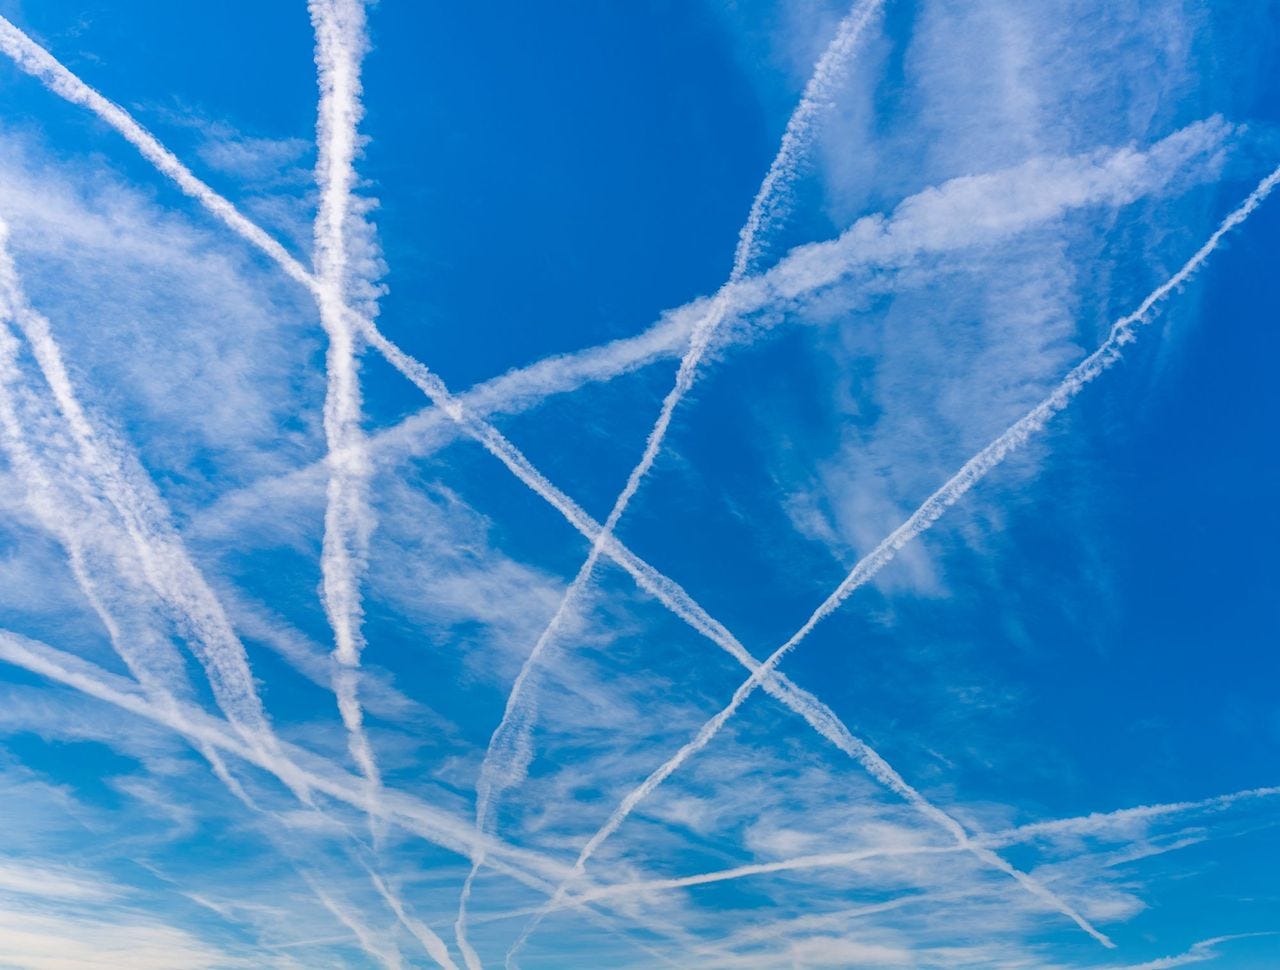 Chemtrails, 'anti-rain' planes and other meteorological conspiracy theories